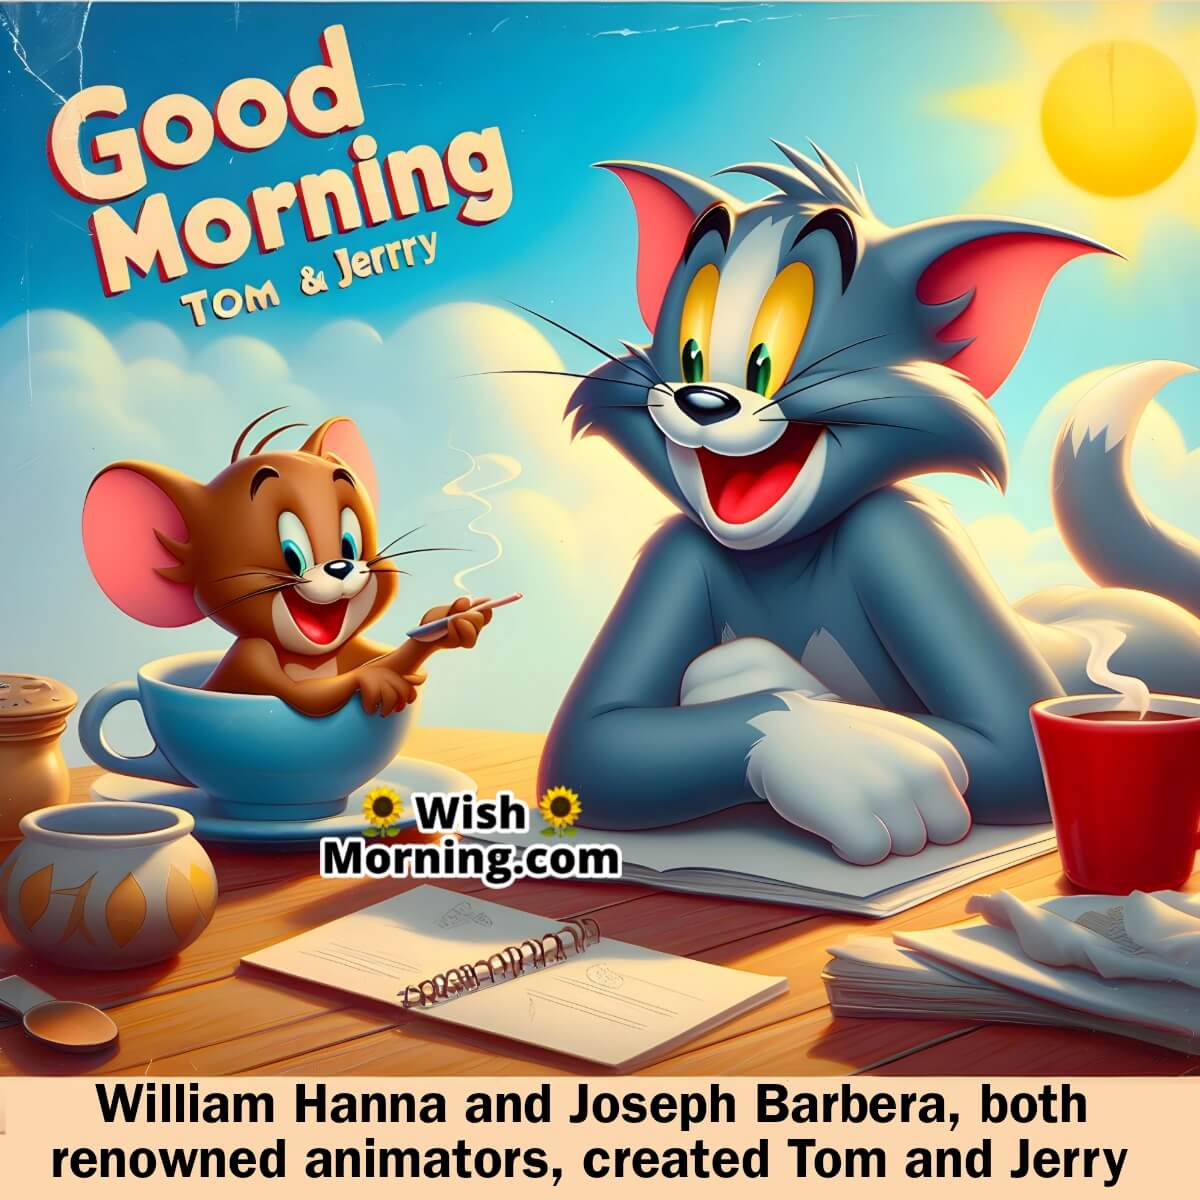 Good Morning Tom And Jerry Created By William Hanna And Joseph Barbera